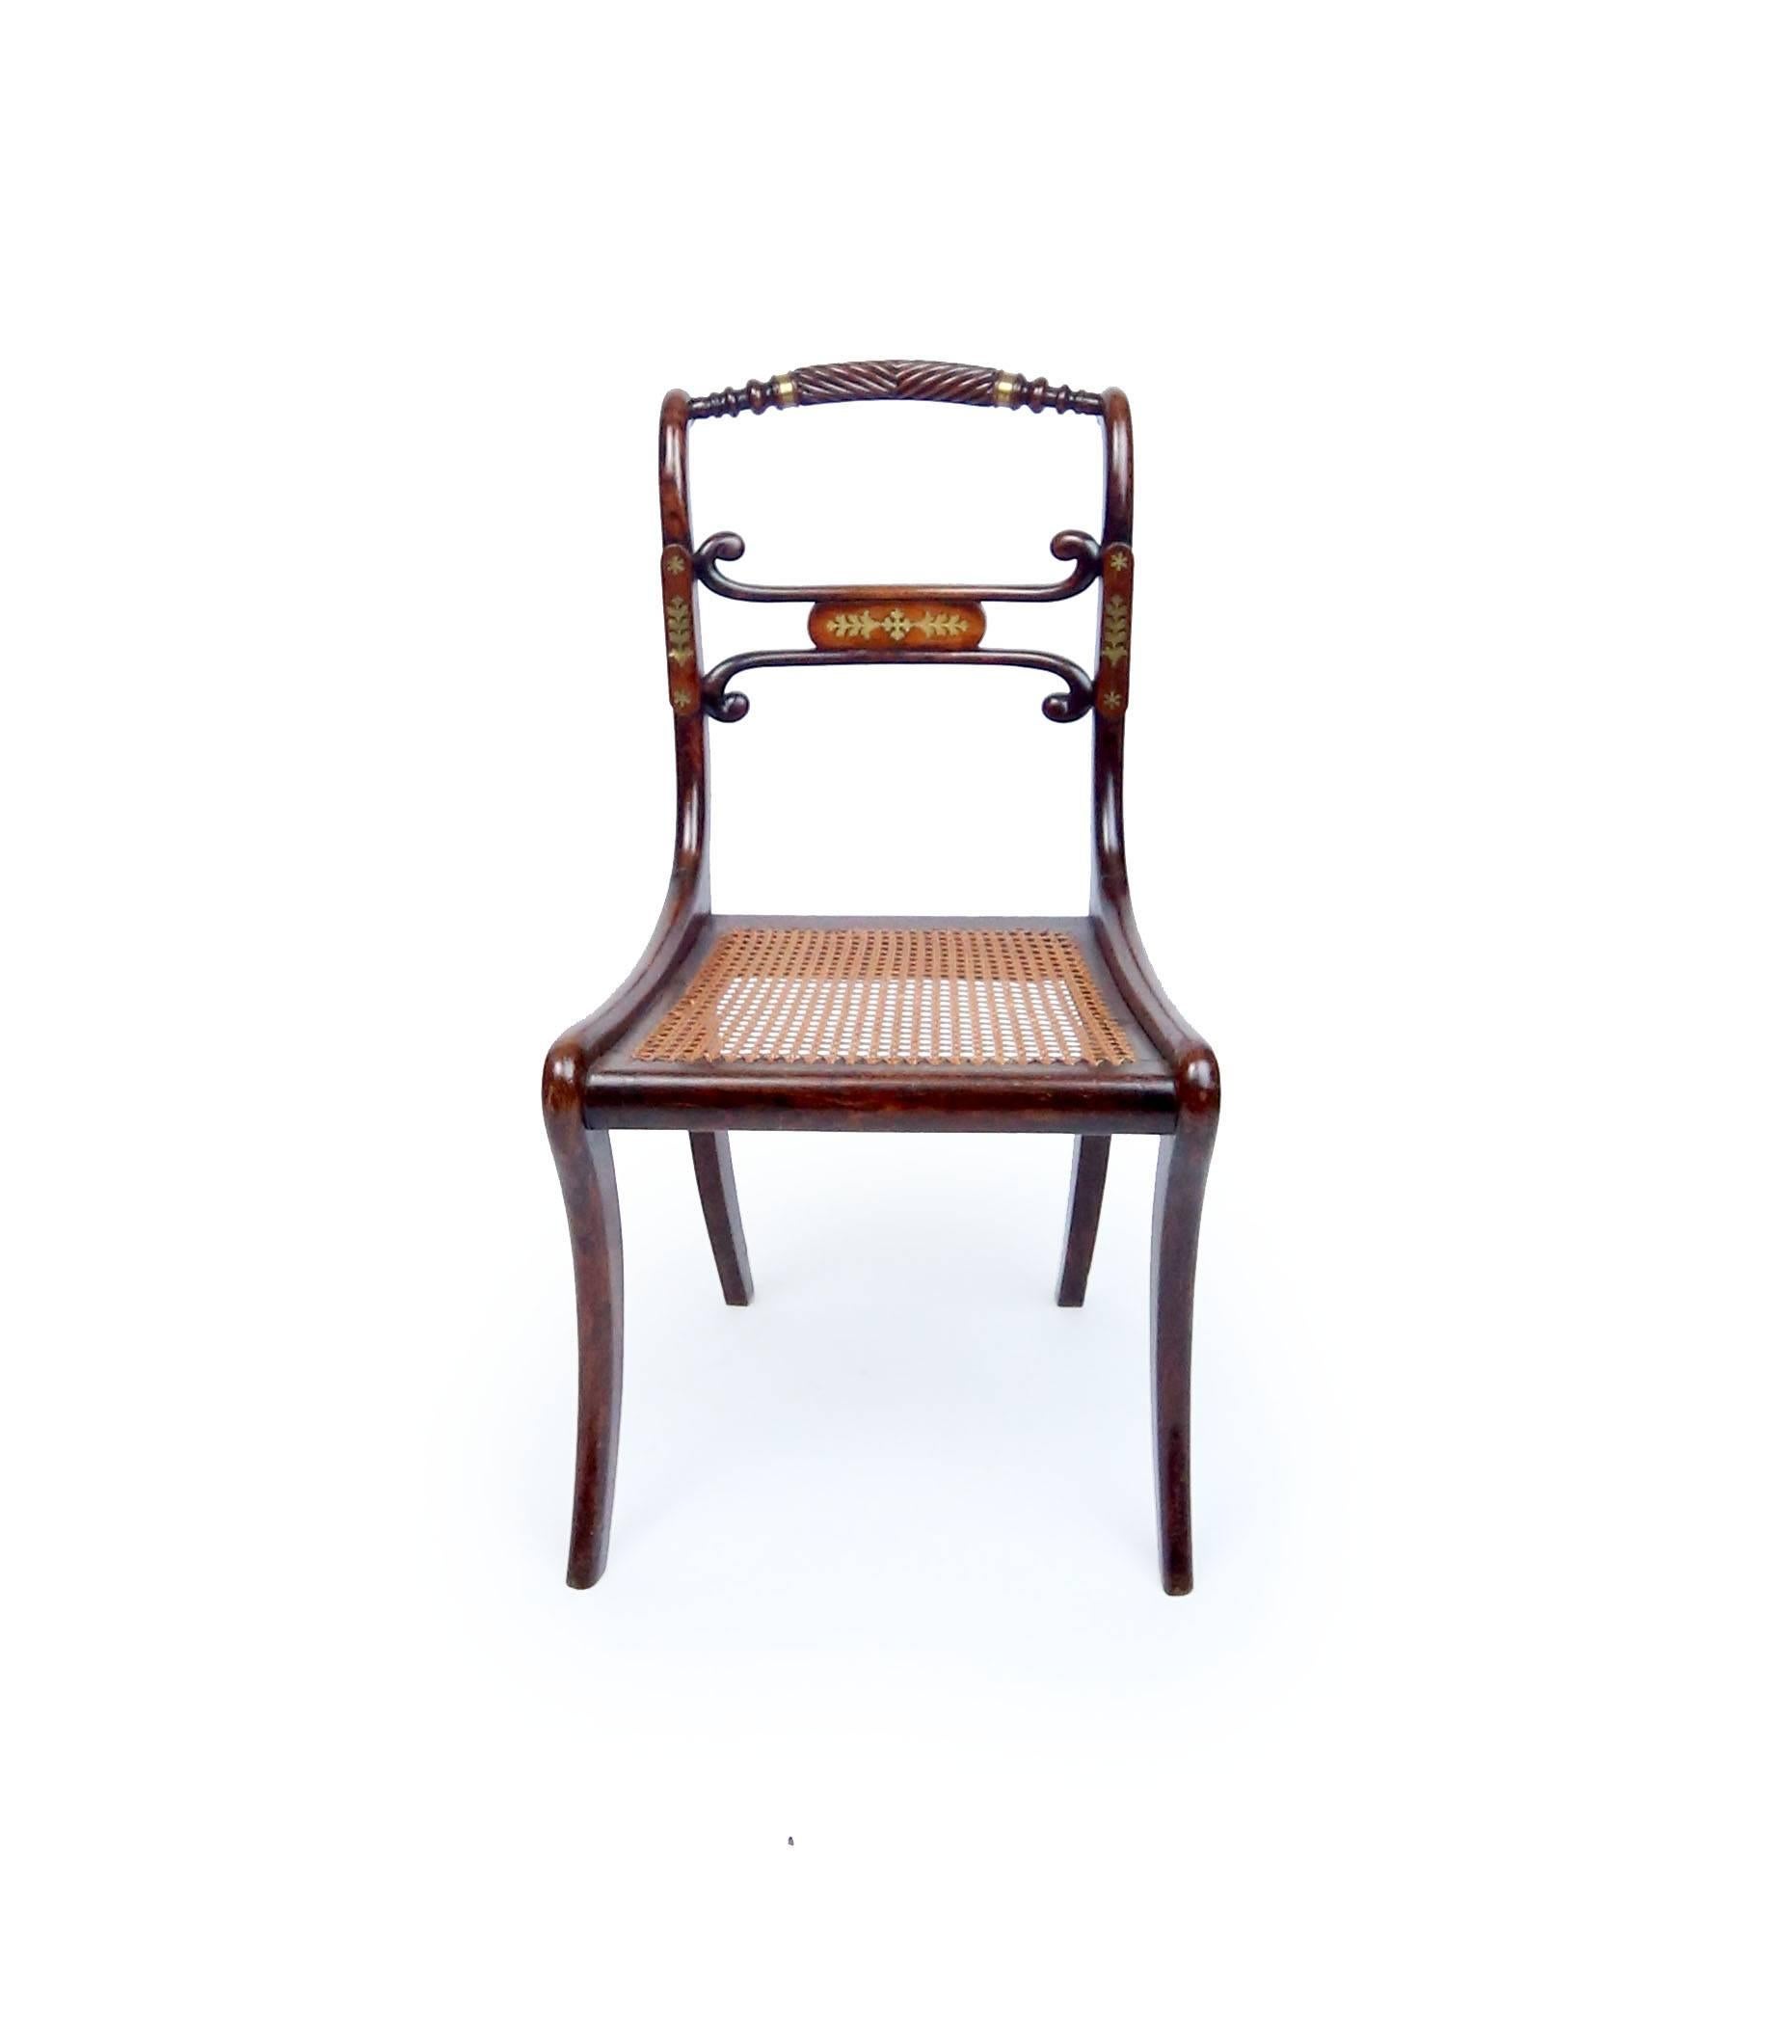 Four fine Geroge III rosewood chairs with inlaid brass details, gadrooned crest rail, and saber legs. Original caned seats, horsehair stuffed button-tufted cushions upholstered in pink silk. One chairs bears a mid-20th century sticker officially